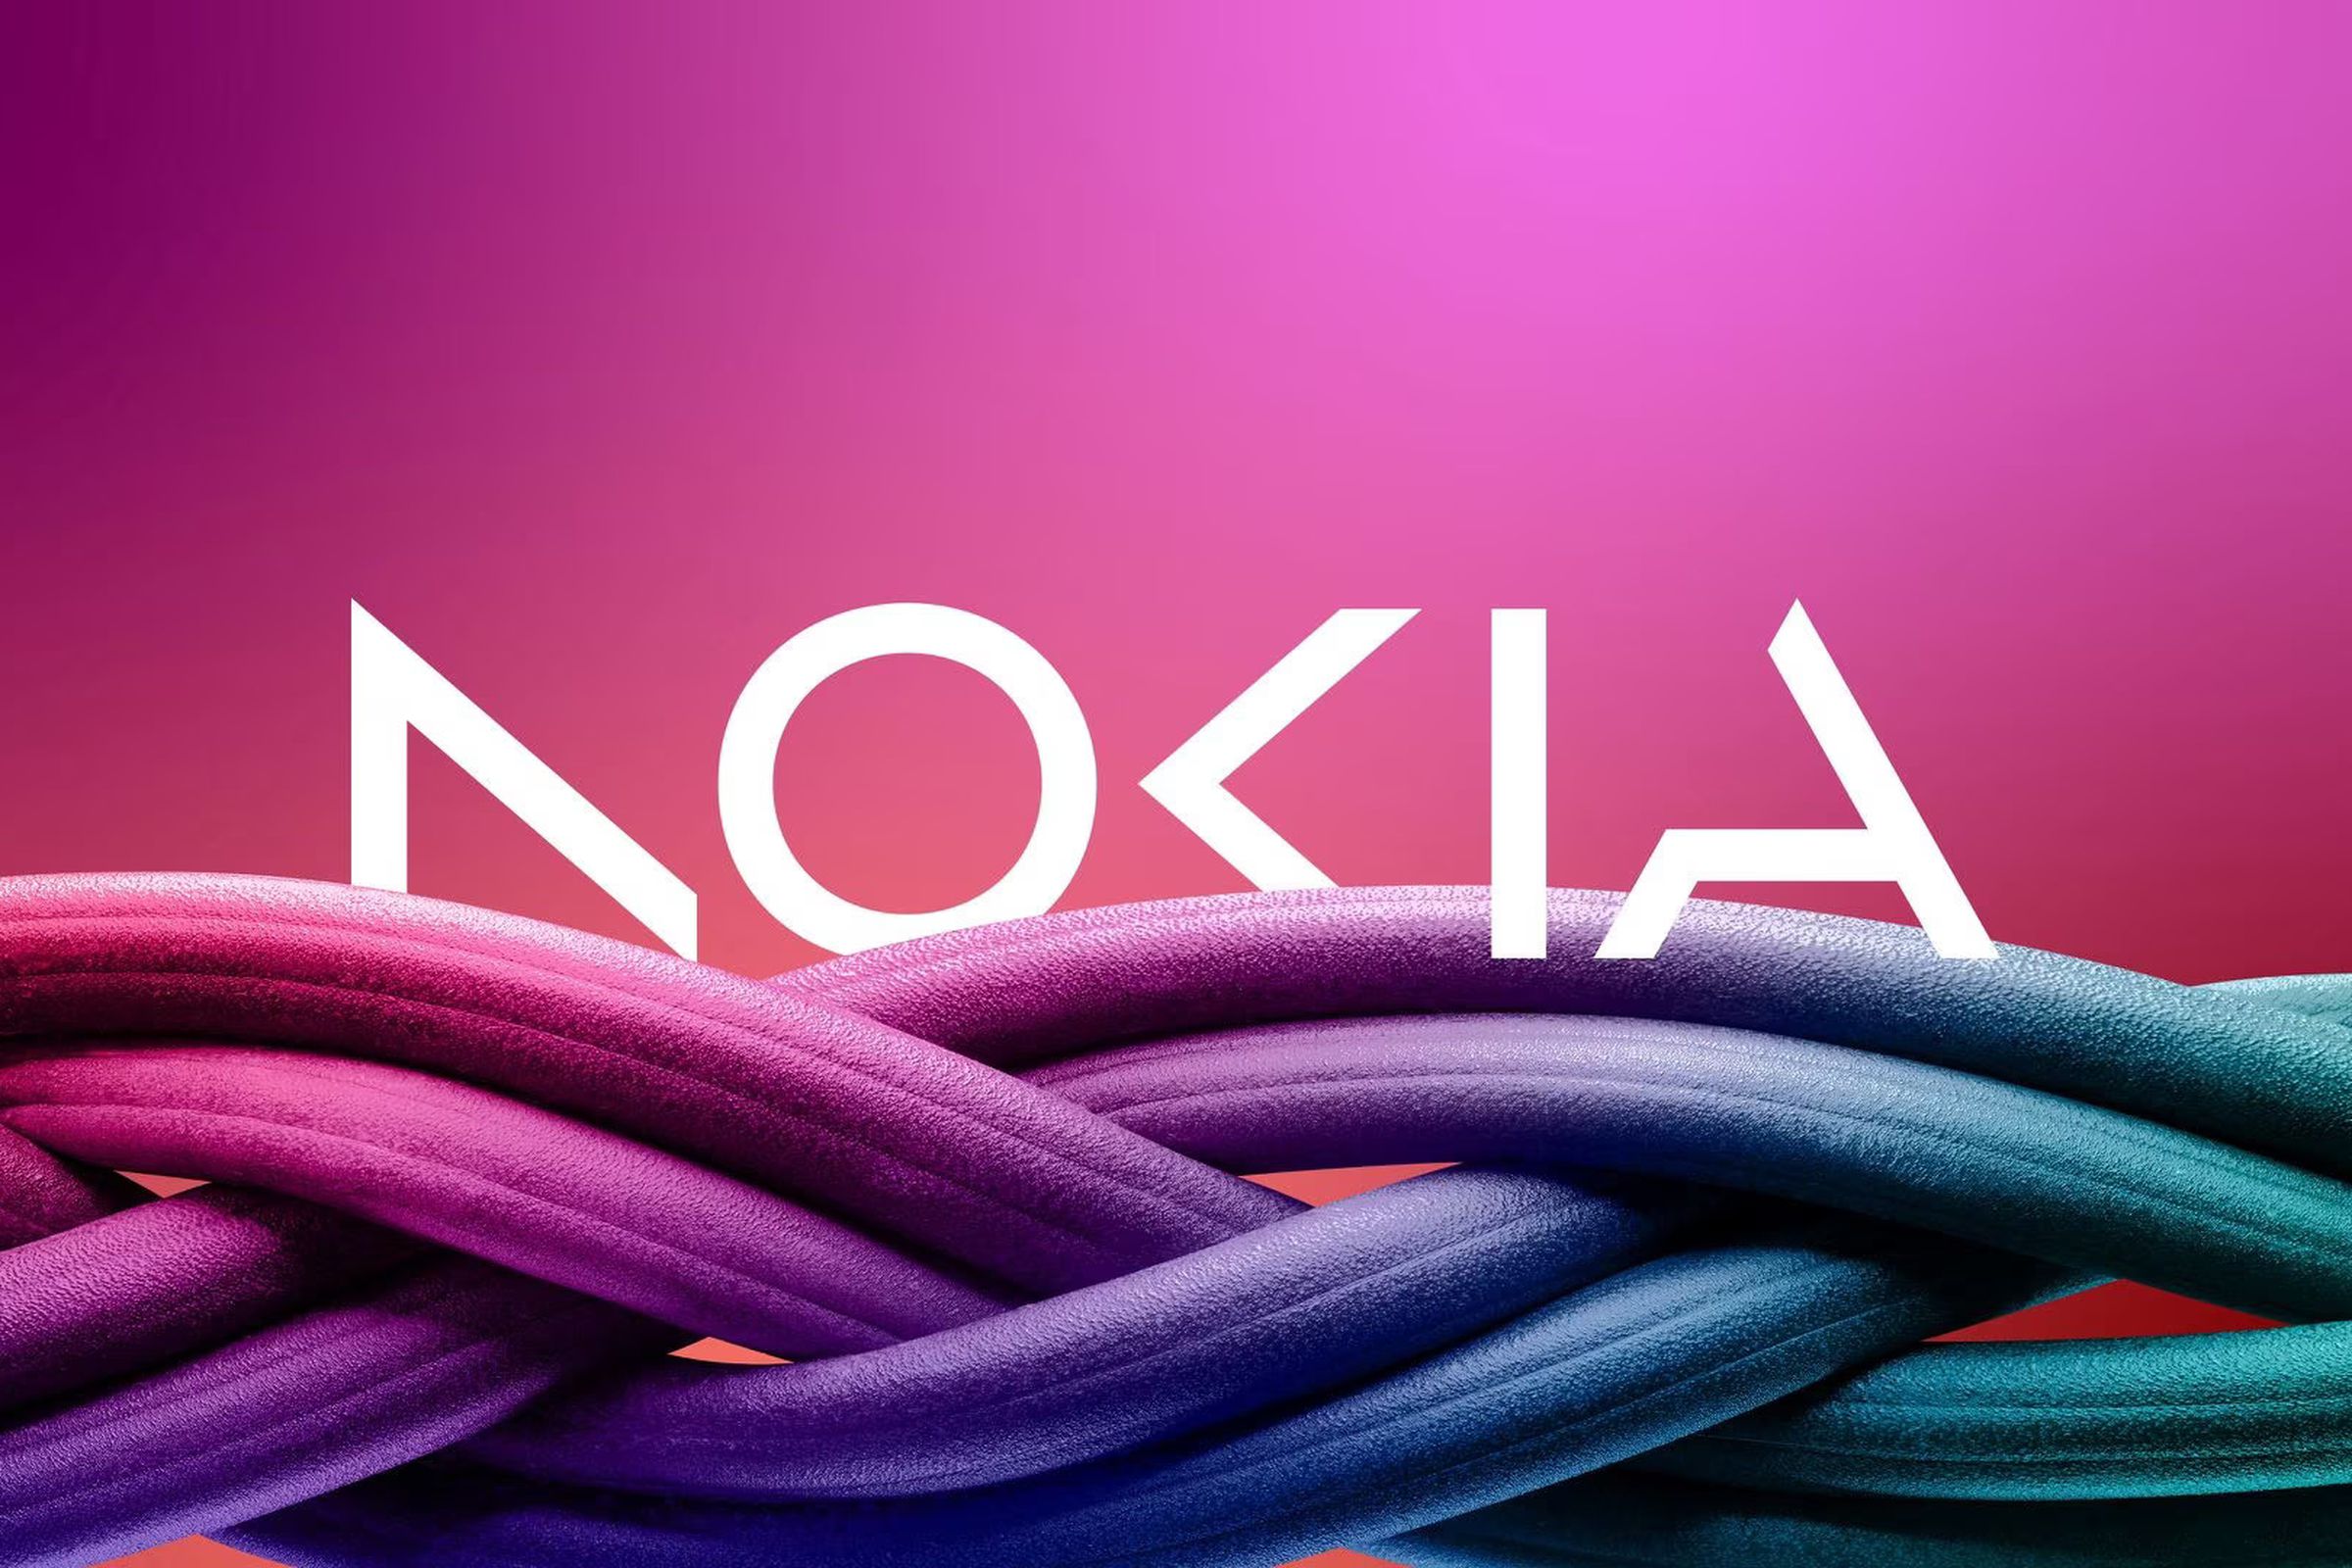 An image of the new Nokia logo, which uses more angular styling than the original. 